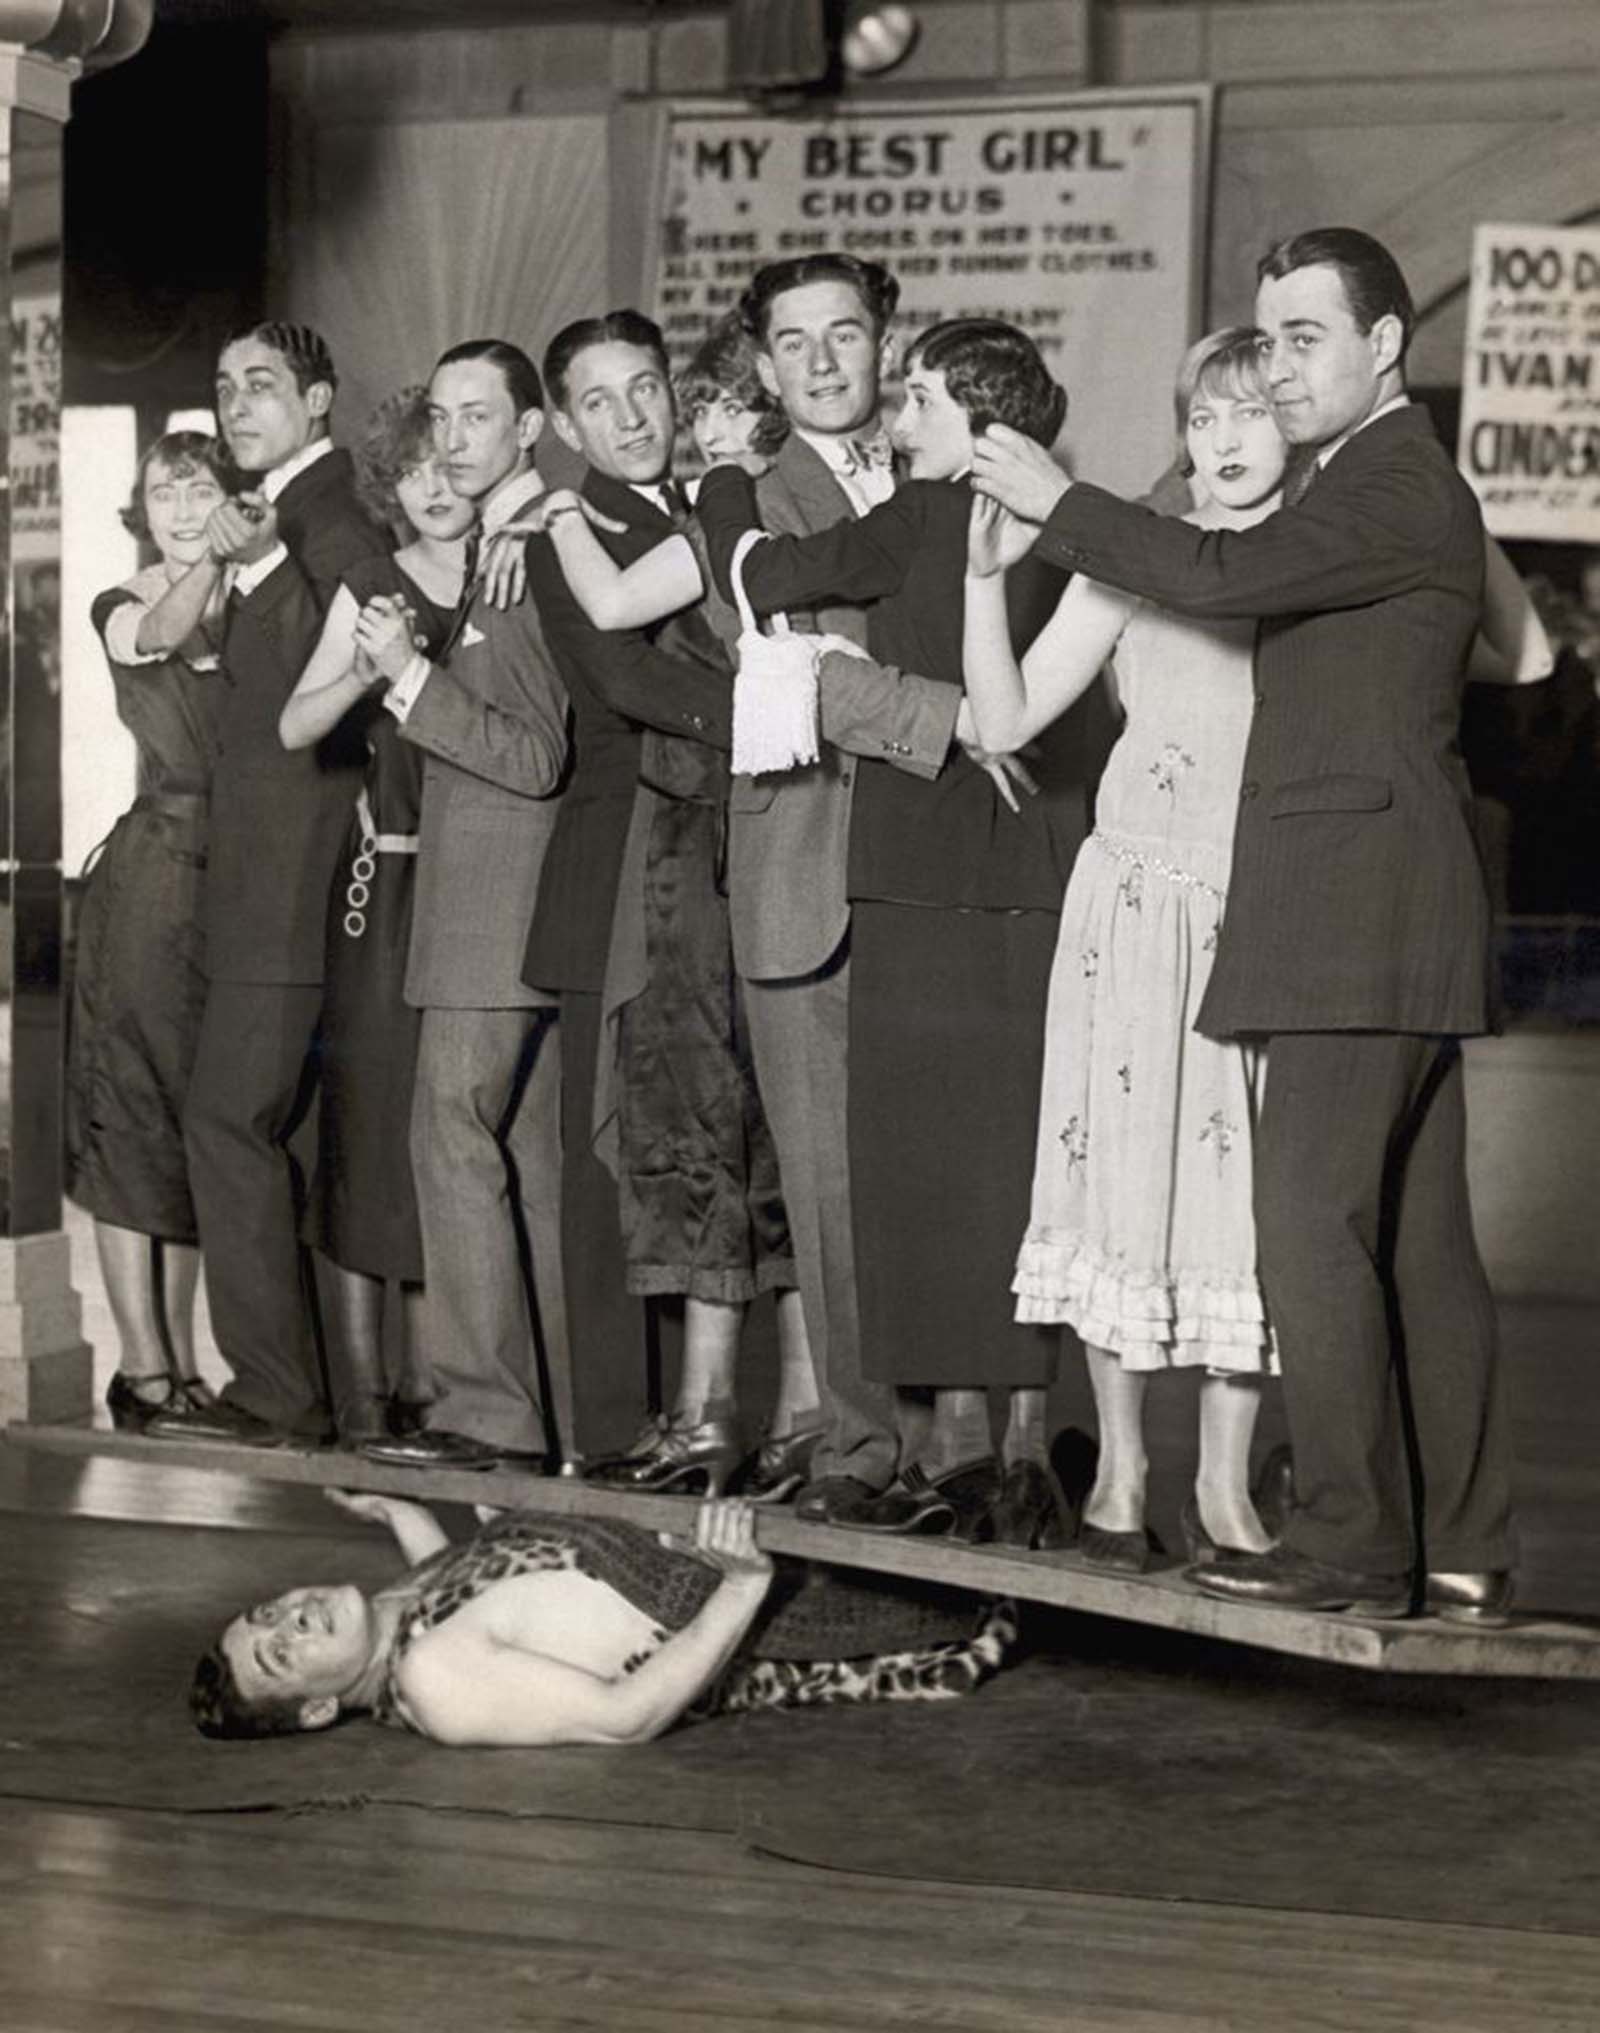 The world’s strongest strongman, Ivan “The Great” demonstrates his strength by holding a plank with five dancing couples on it, 1924